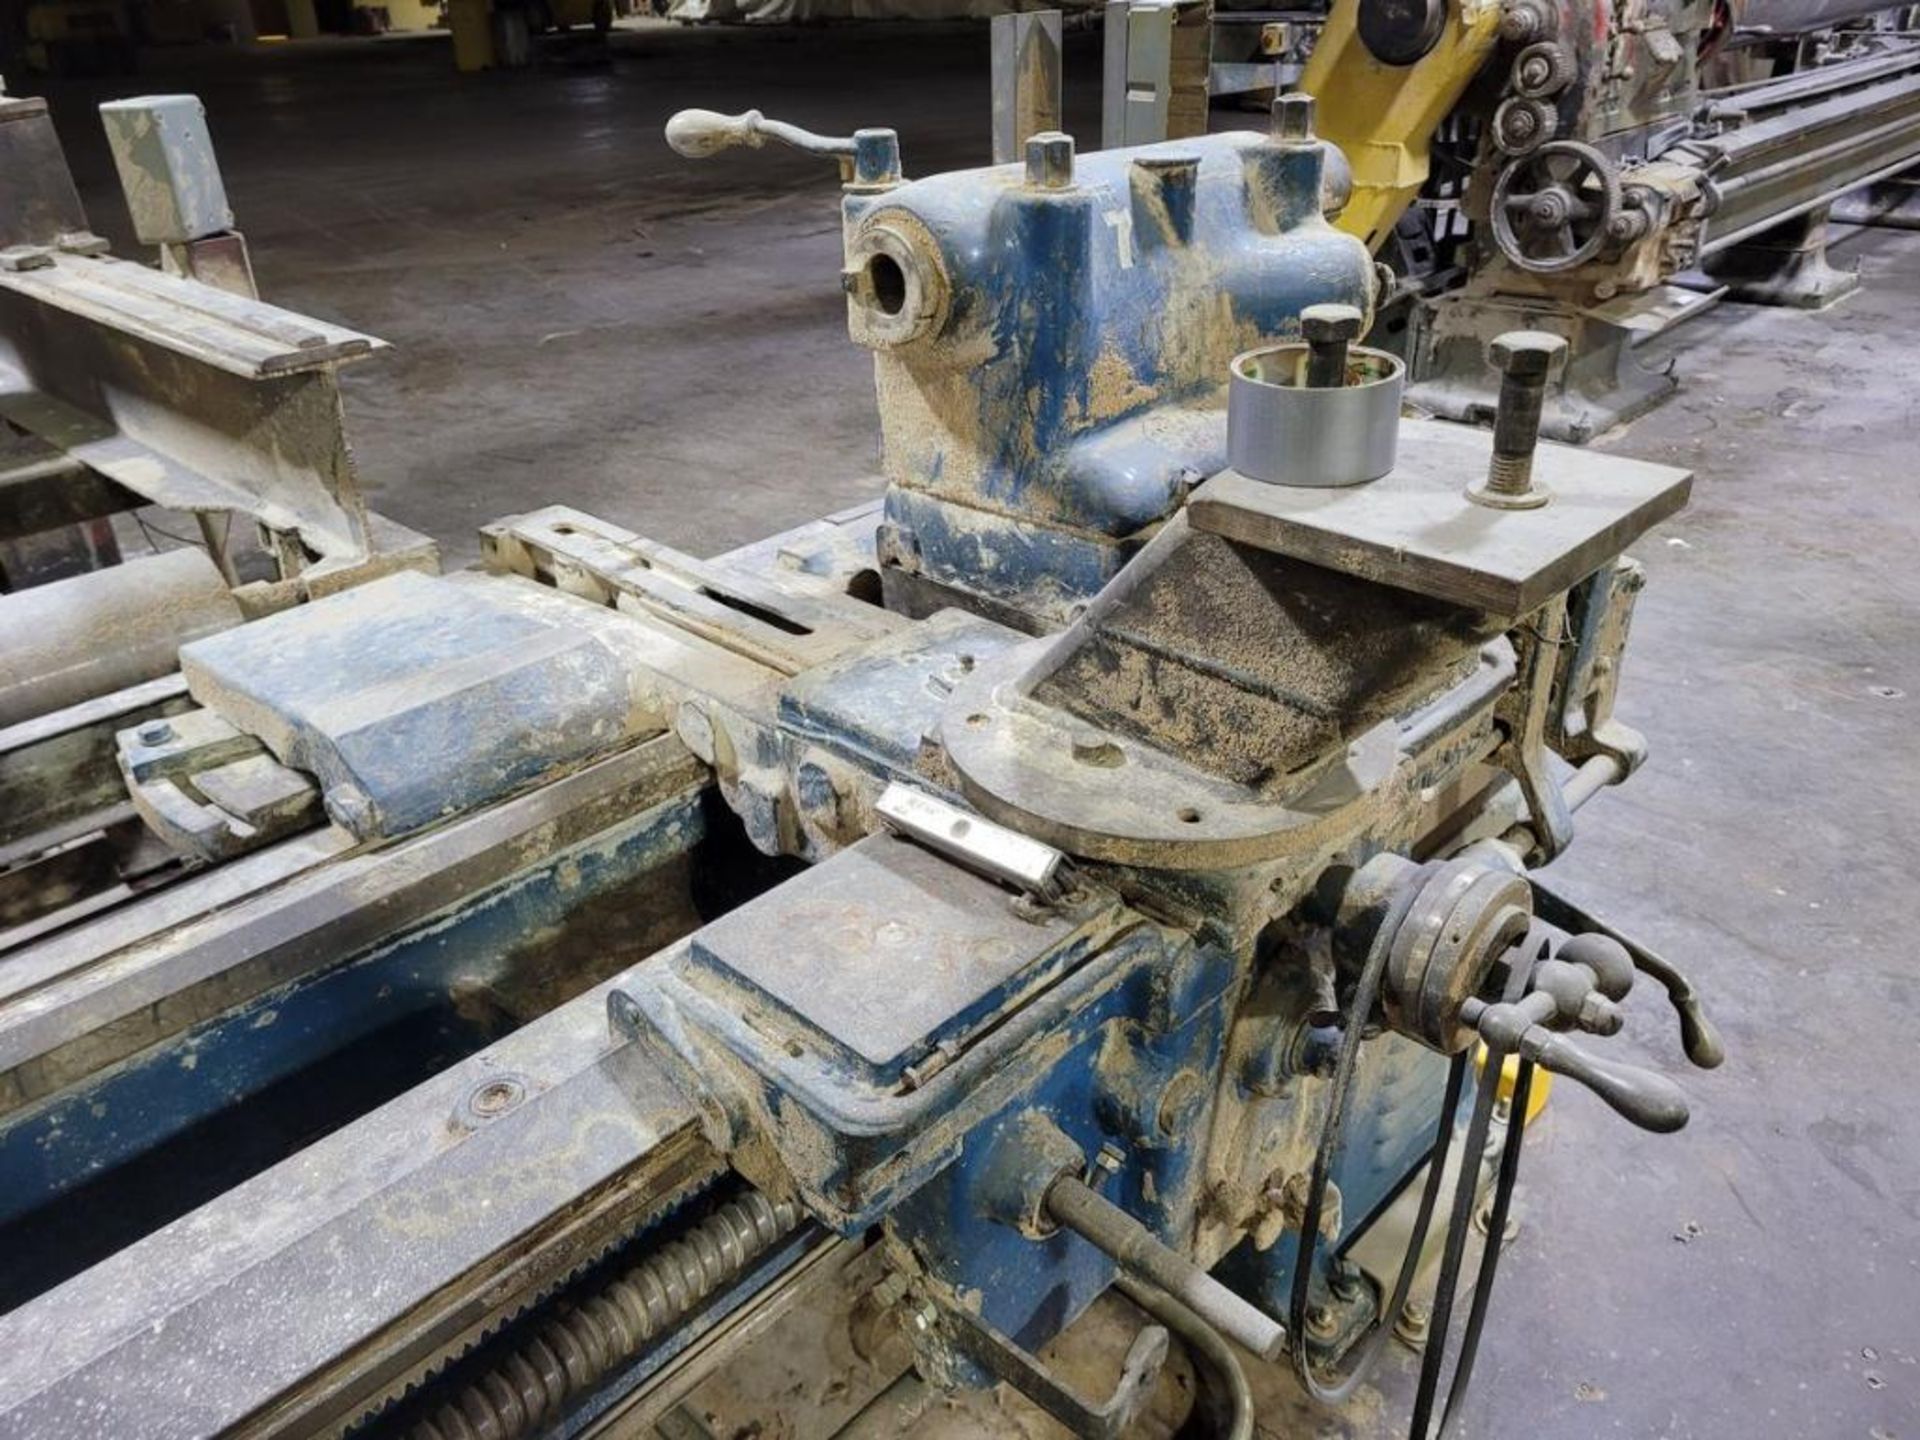 LeBlond Converted Rubber Belt Grinding Lathe: 15-1010 Spindle RPM, Approx. 16" Swing, Approx. 120" B - Image 5 of 6